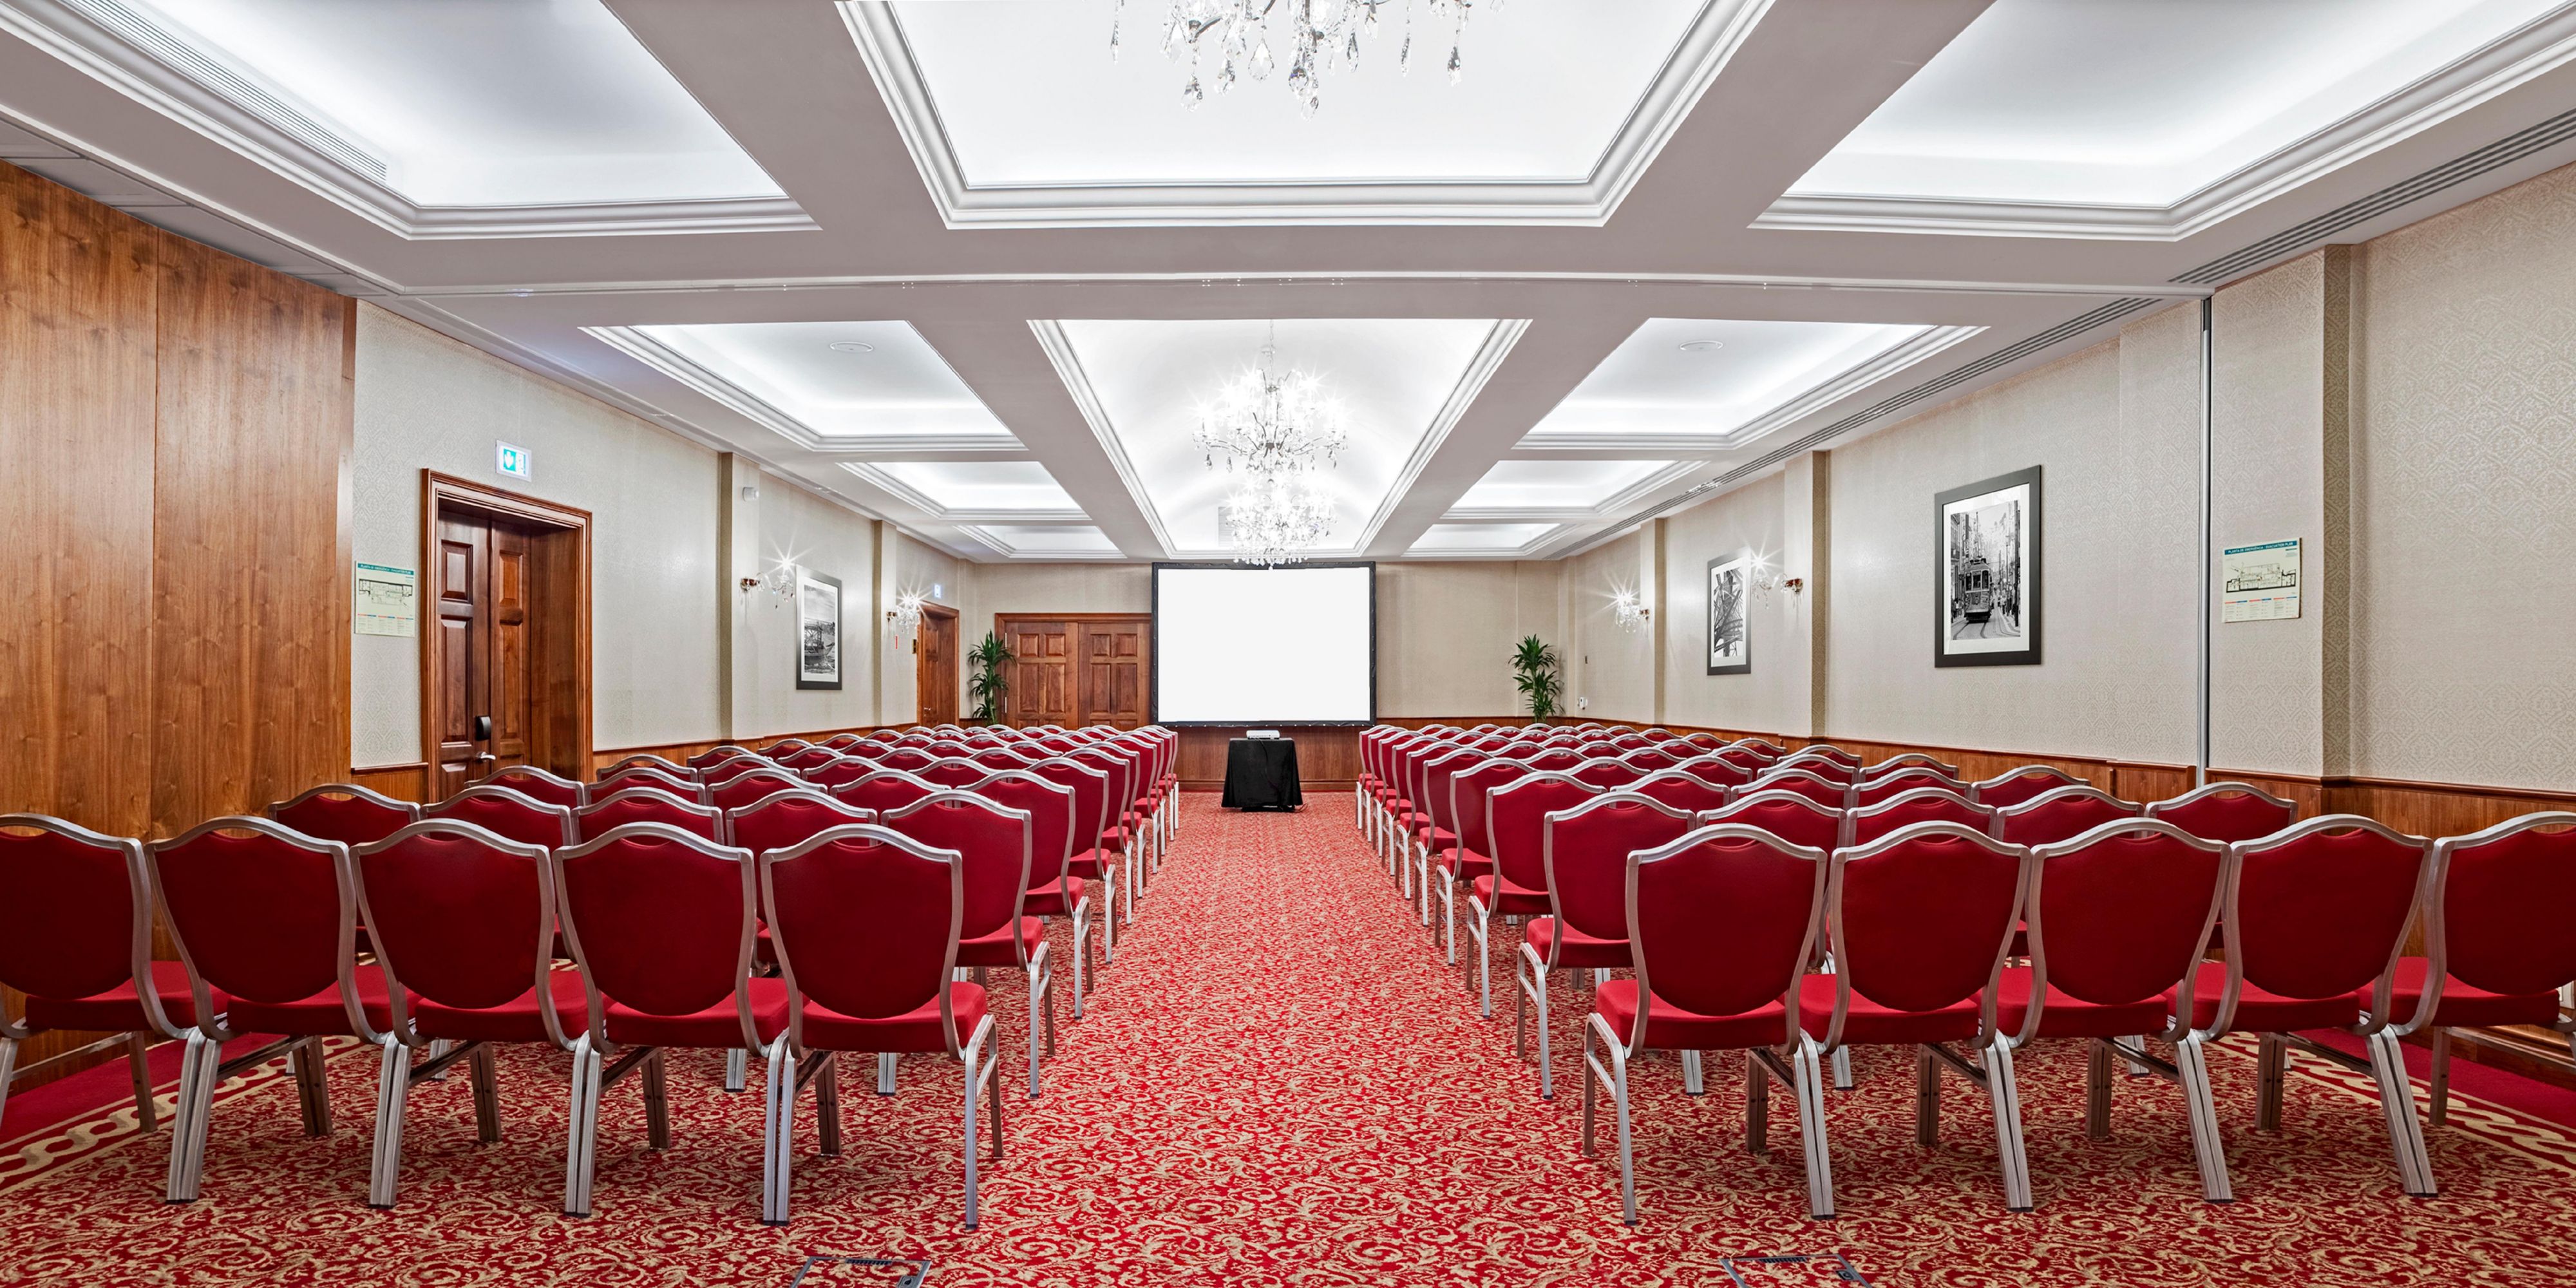 InterContinental Porto - Palácio das Cardosas is ready to host any kind of events! It has a privileged location in the center of Porto with 121 m2 and all the necessary conditions to provide a tailor-made event. Take advantage of the distinct meeting packages adapted to the needs of each group, with the possibility of including accommodation.